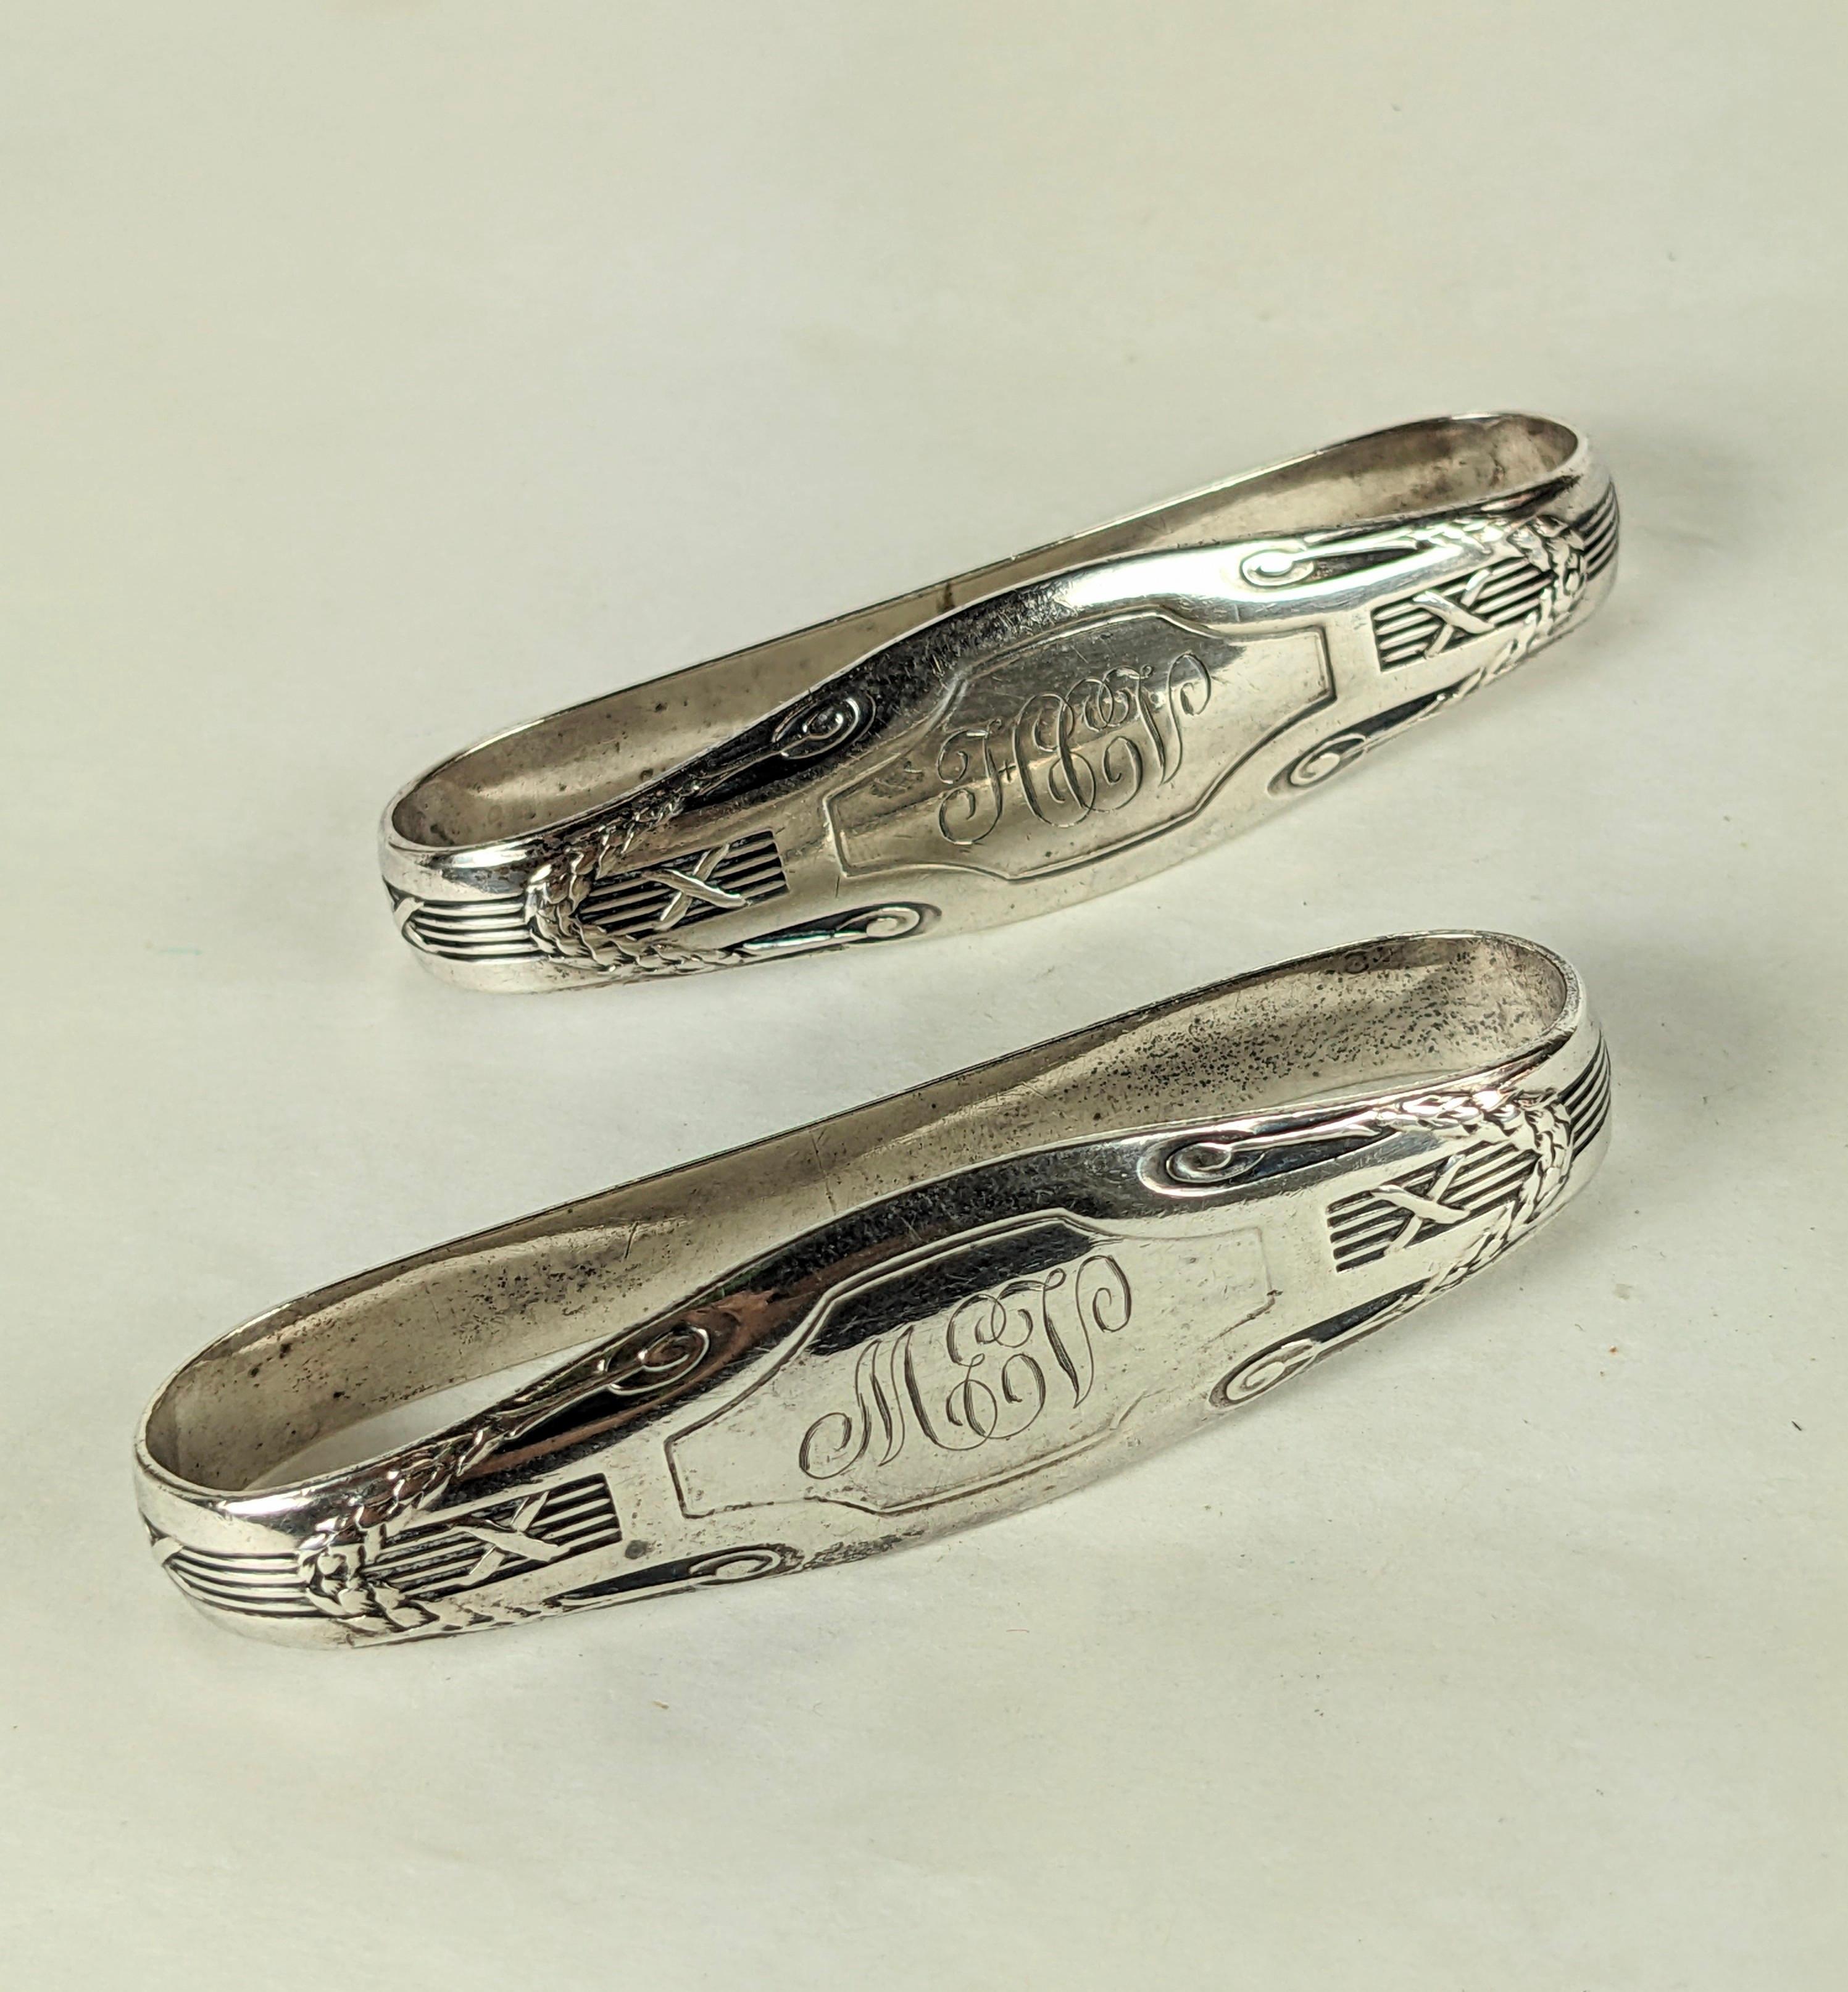 Pair of large Unger Brothers Edwardian Napkin Holders with reed and wreath designs. Heavy sterling, each with triple period monograms. Priced for the pair. 
1920's USA. Signed Unger Bros. 